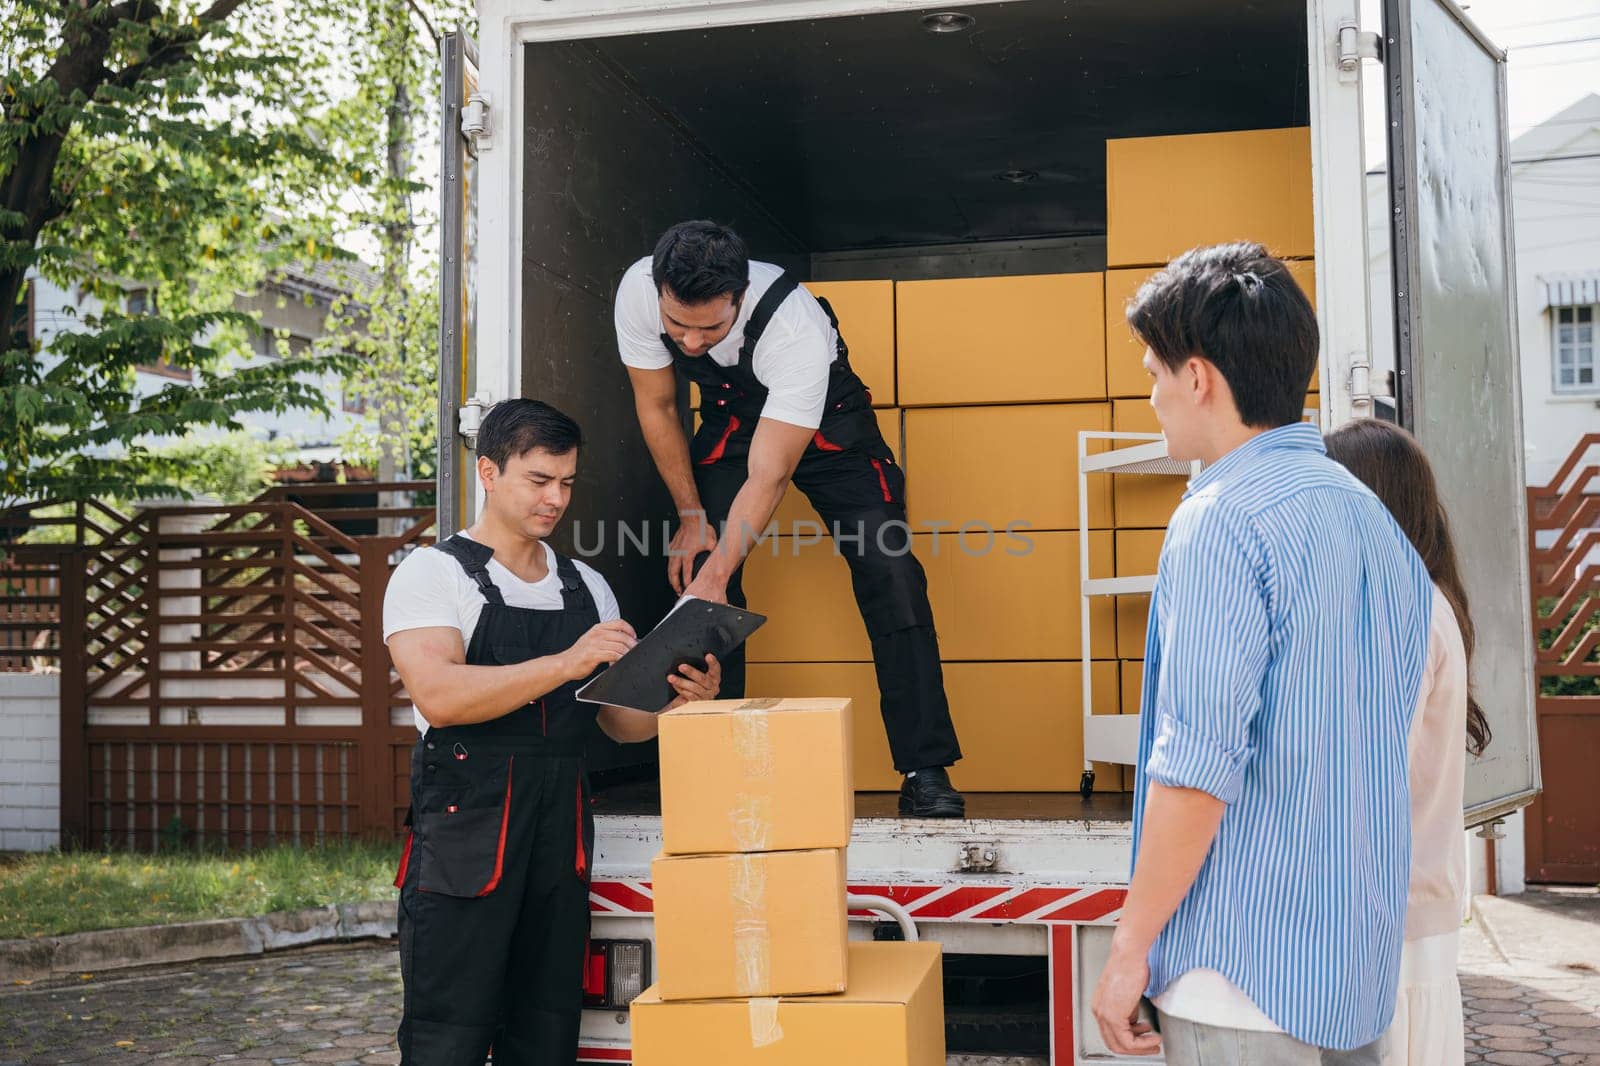 Professional movers aid a satisfied couple who signs the delivery checklist after furniture upload. Teamwork and customer satisfaction are evident. Moving Day Concept by Sorapop